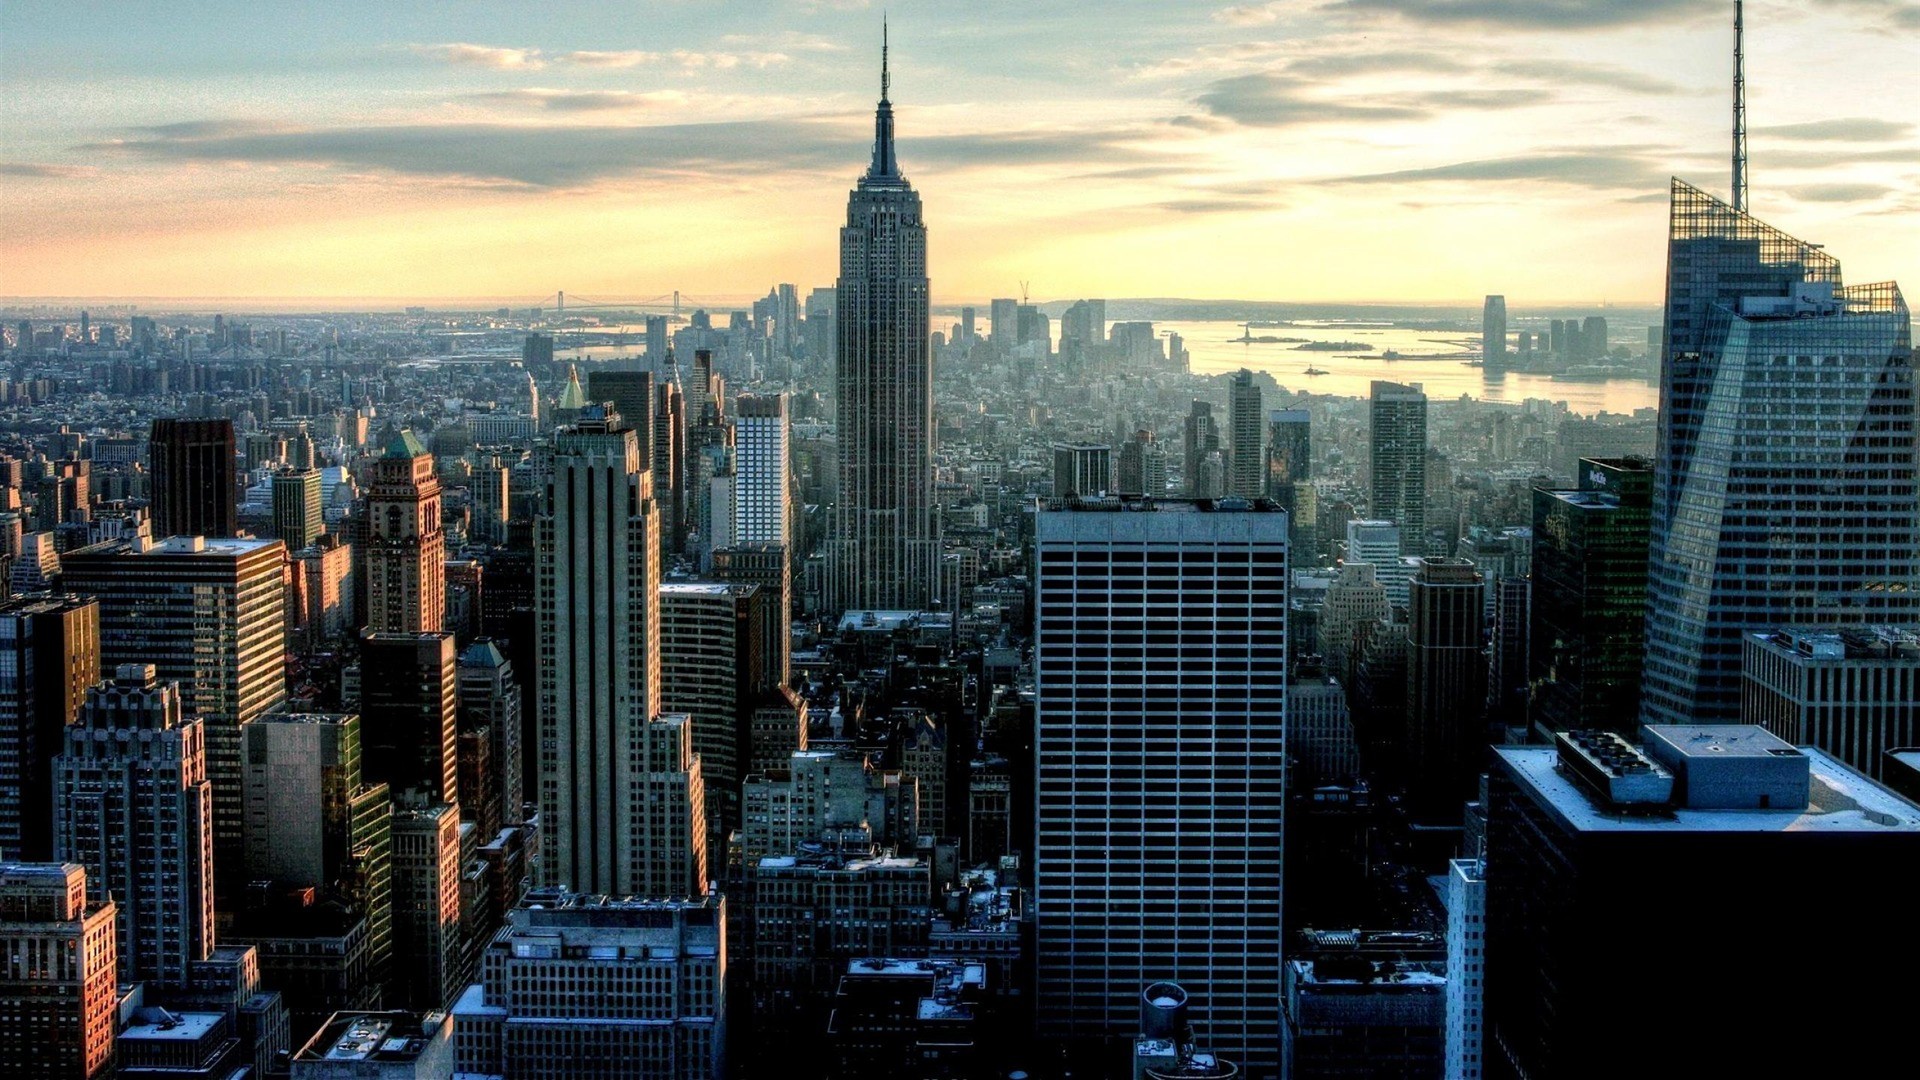 1920x1080 new york city empire state building city photography wallpaper hd high  definition windows 10 mac apple colourful images backgrounds download  wallpaper free ...